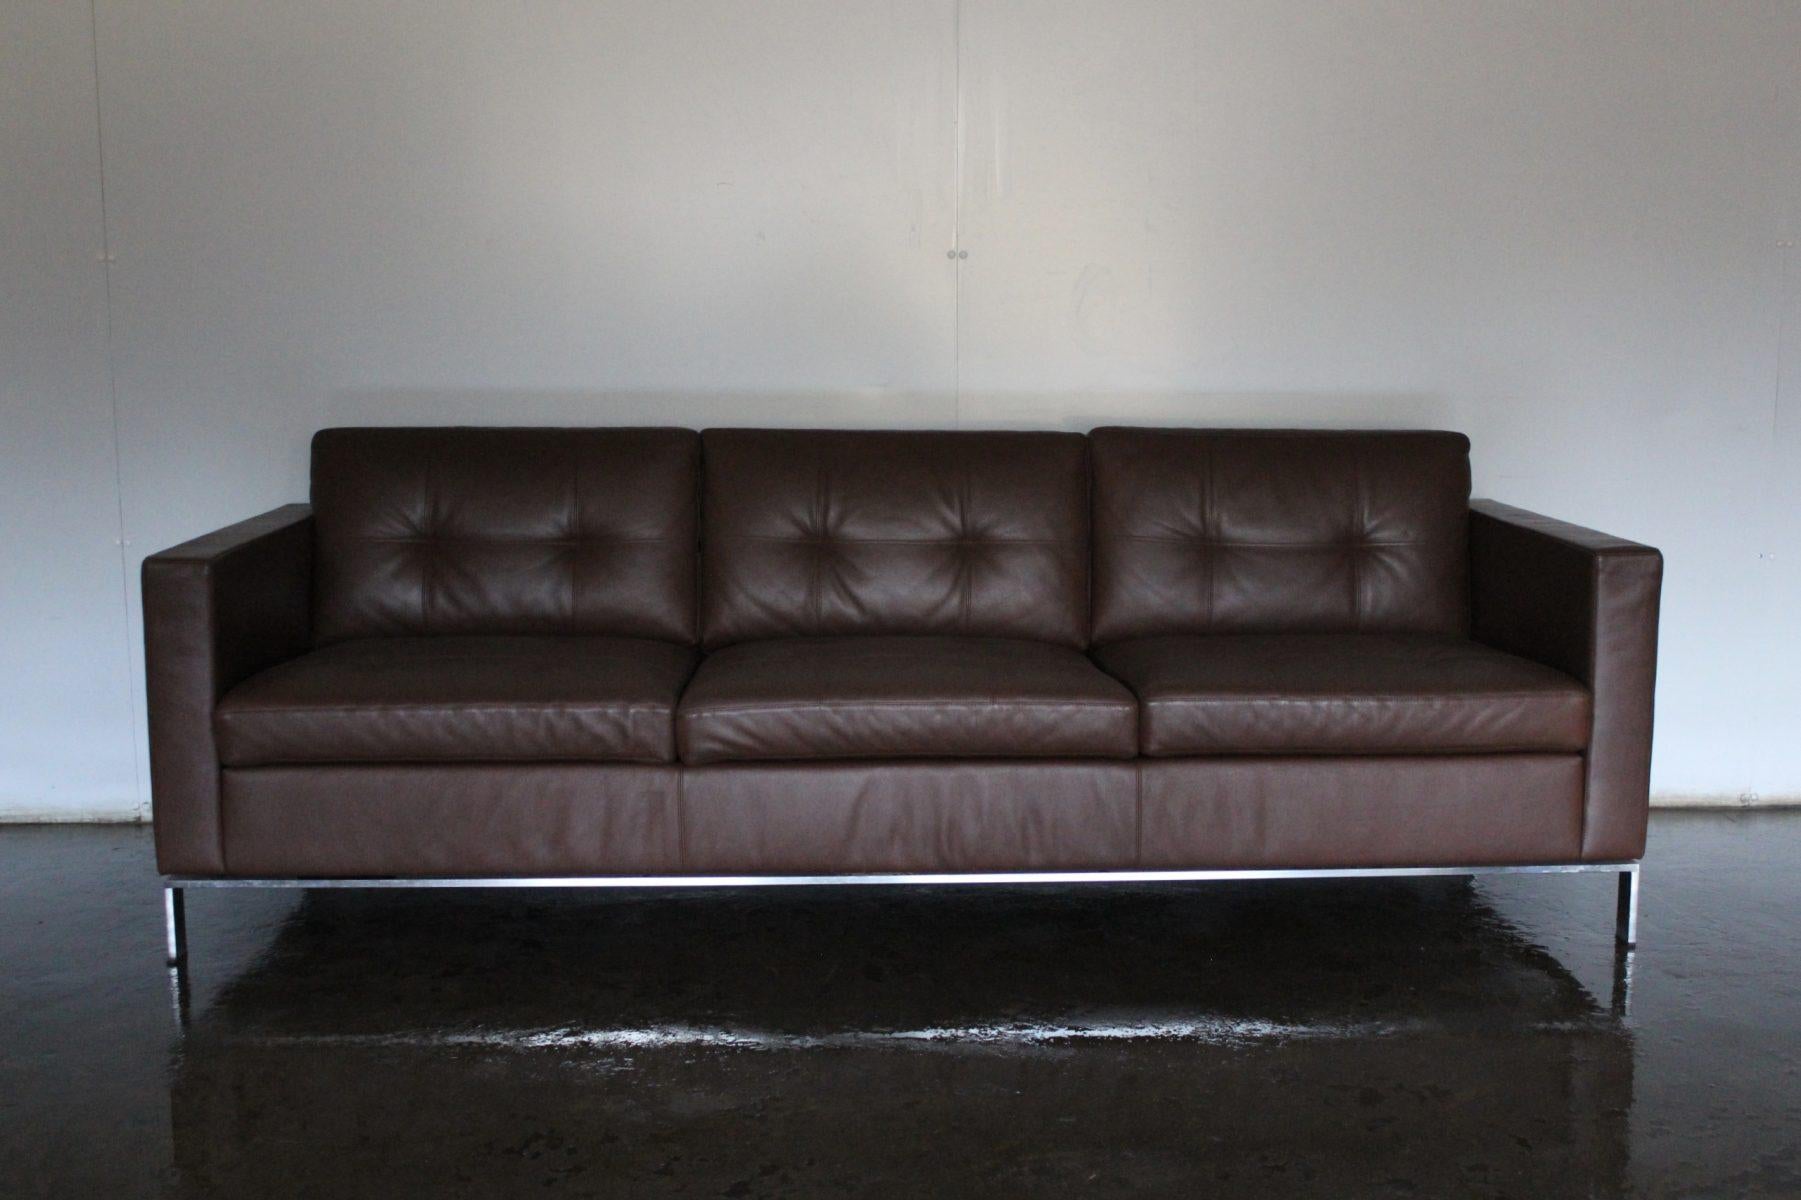 Hello Friends, and welcome to another unmissable offering from Lord Browns Furniture, the UK’s premier resource for fine Sofas and Chairs.

On offer on this occasion is a rare, “Foster 502.30” 3-Seat Sofa, from the world renown German furniture